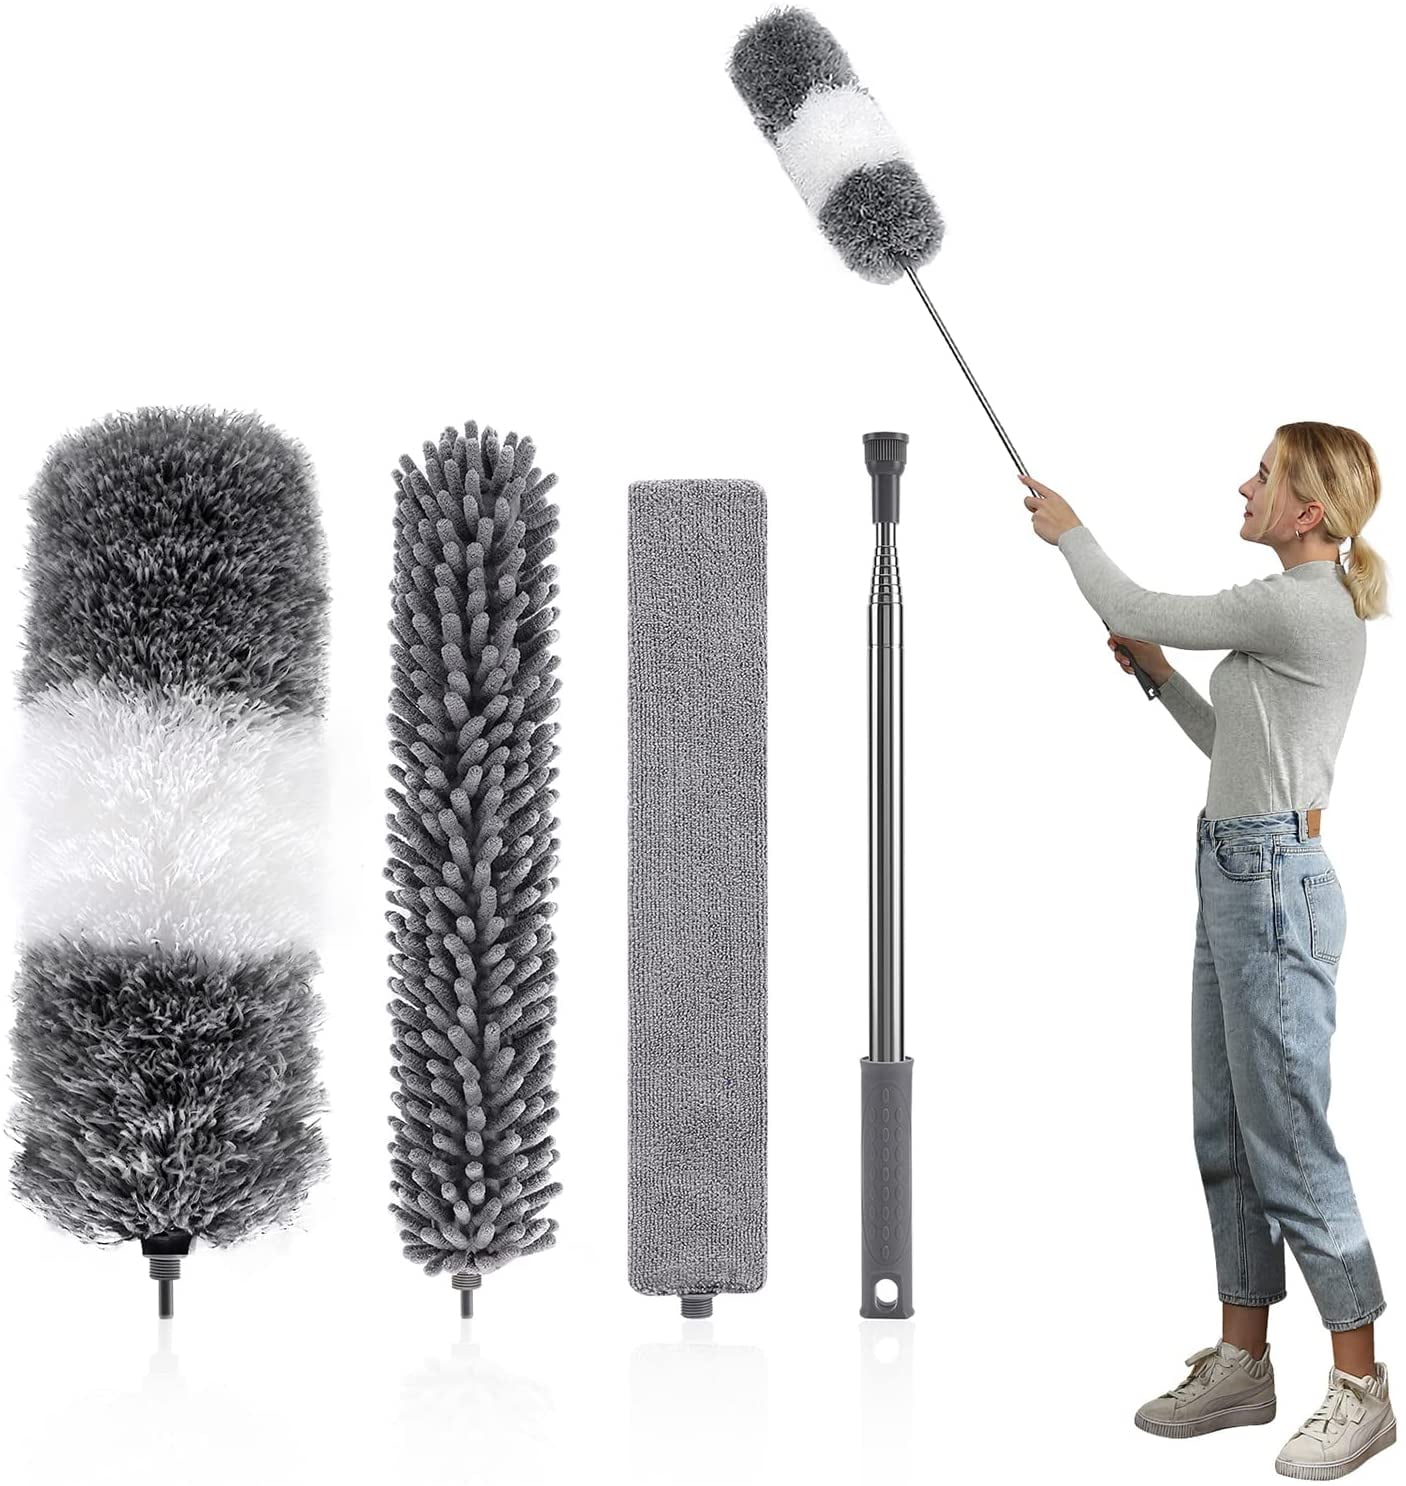 Reviews for DocaPole Microfiber Feather High Reach Cleaning Kit with 30 ft.  Telescopic Extension Pole Window Squeegee Cobweb and Fan Dusters